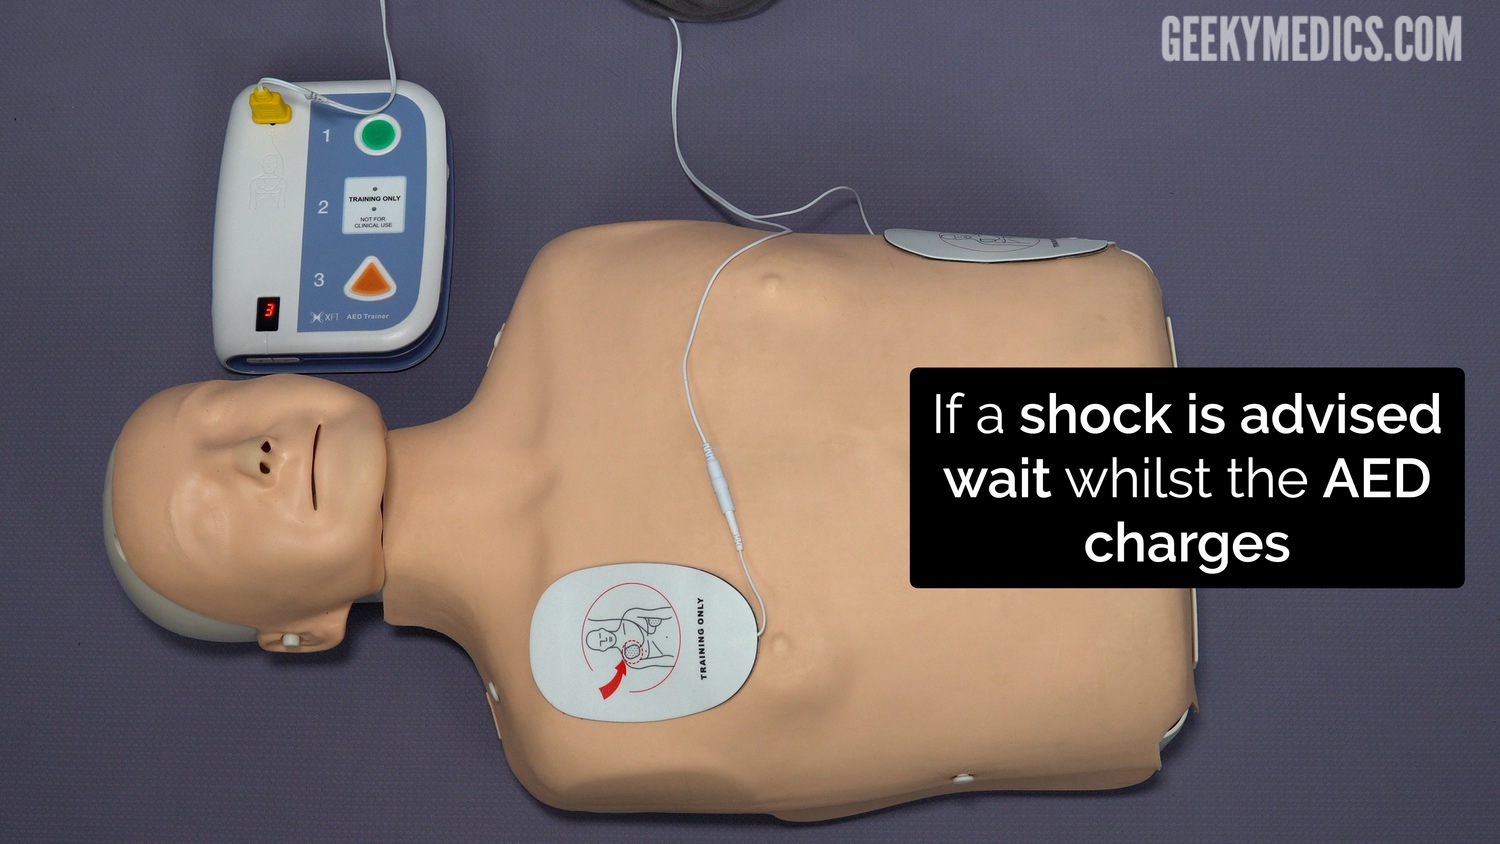 If a shock is required, wait for the AED to charge